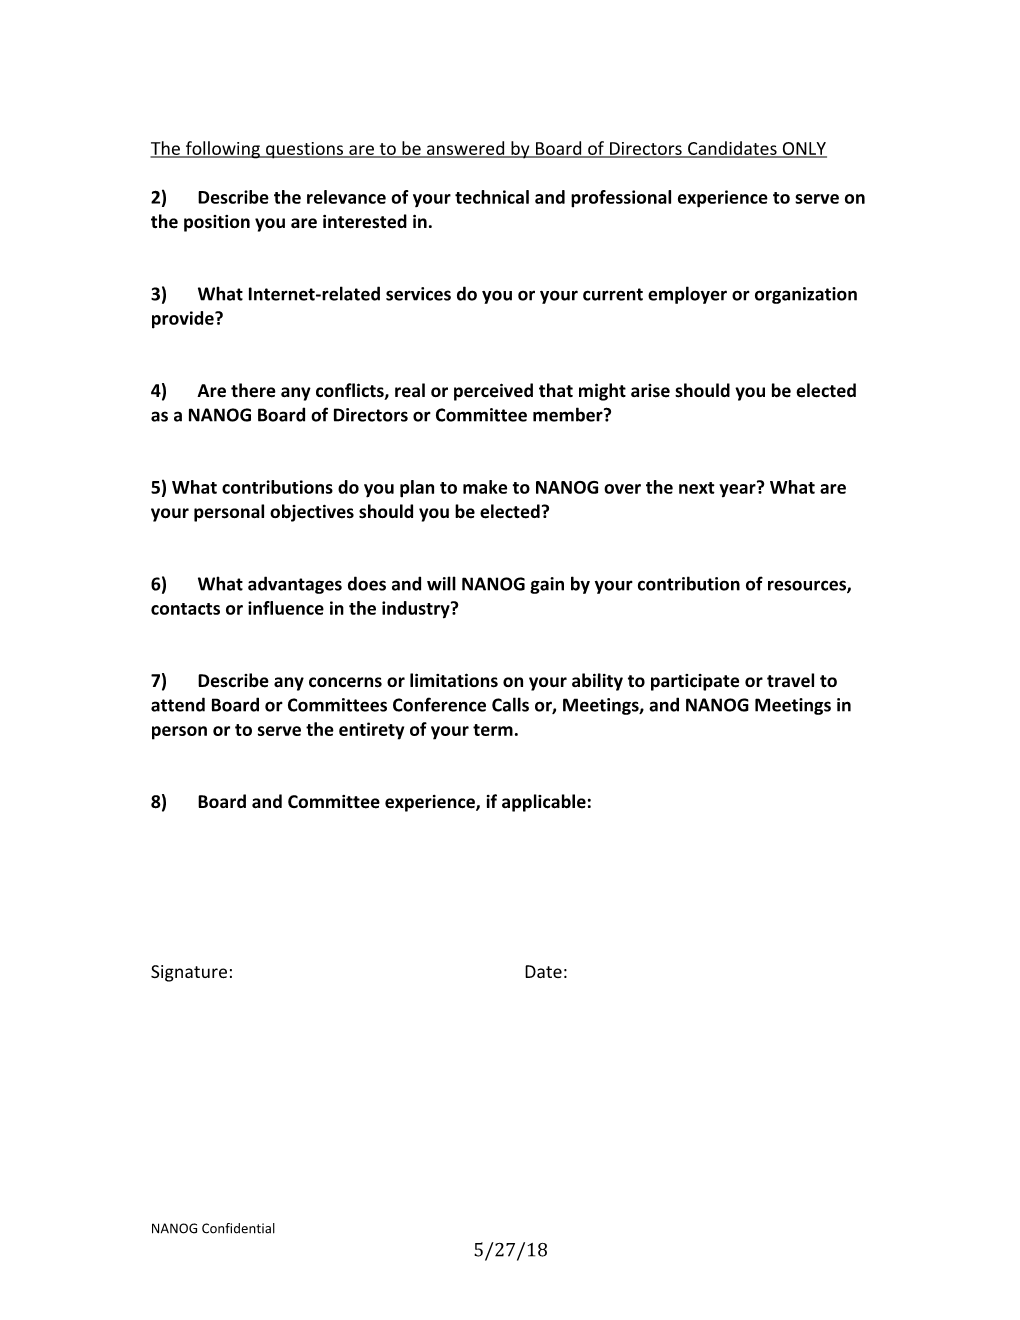 Please Complete the Attached Form and Forward by E-Mail To